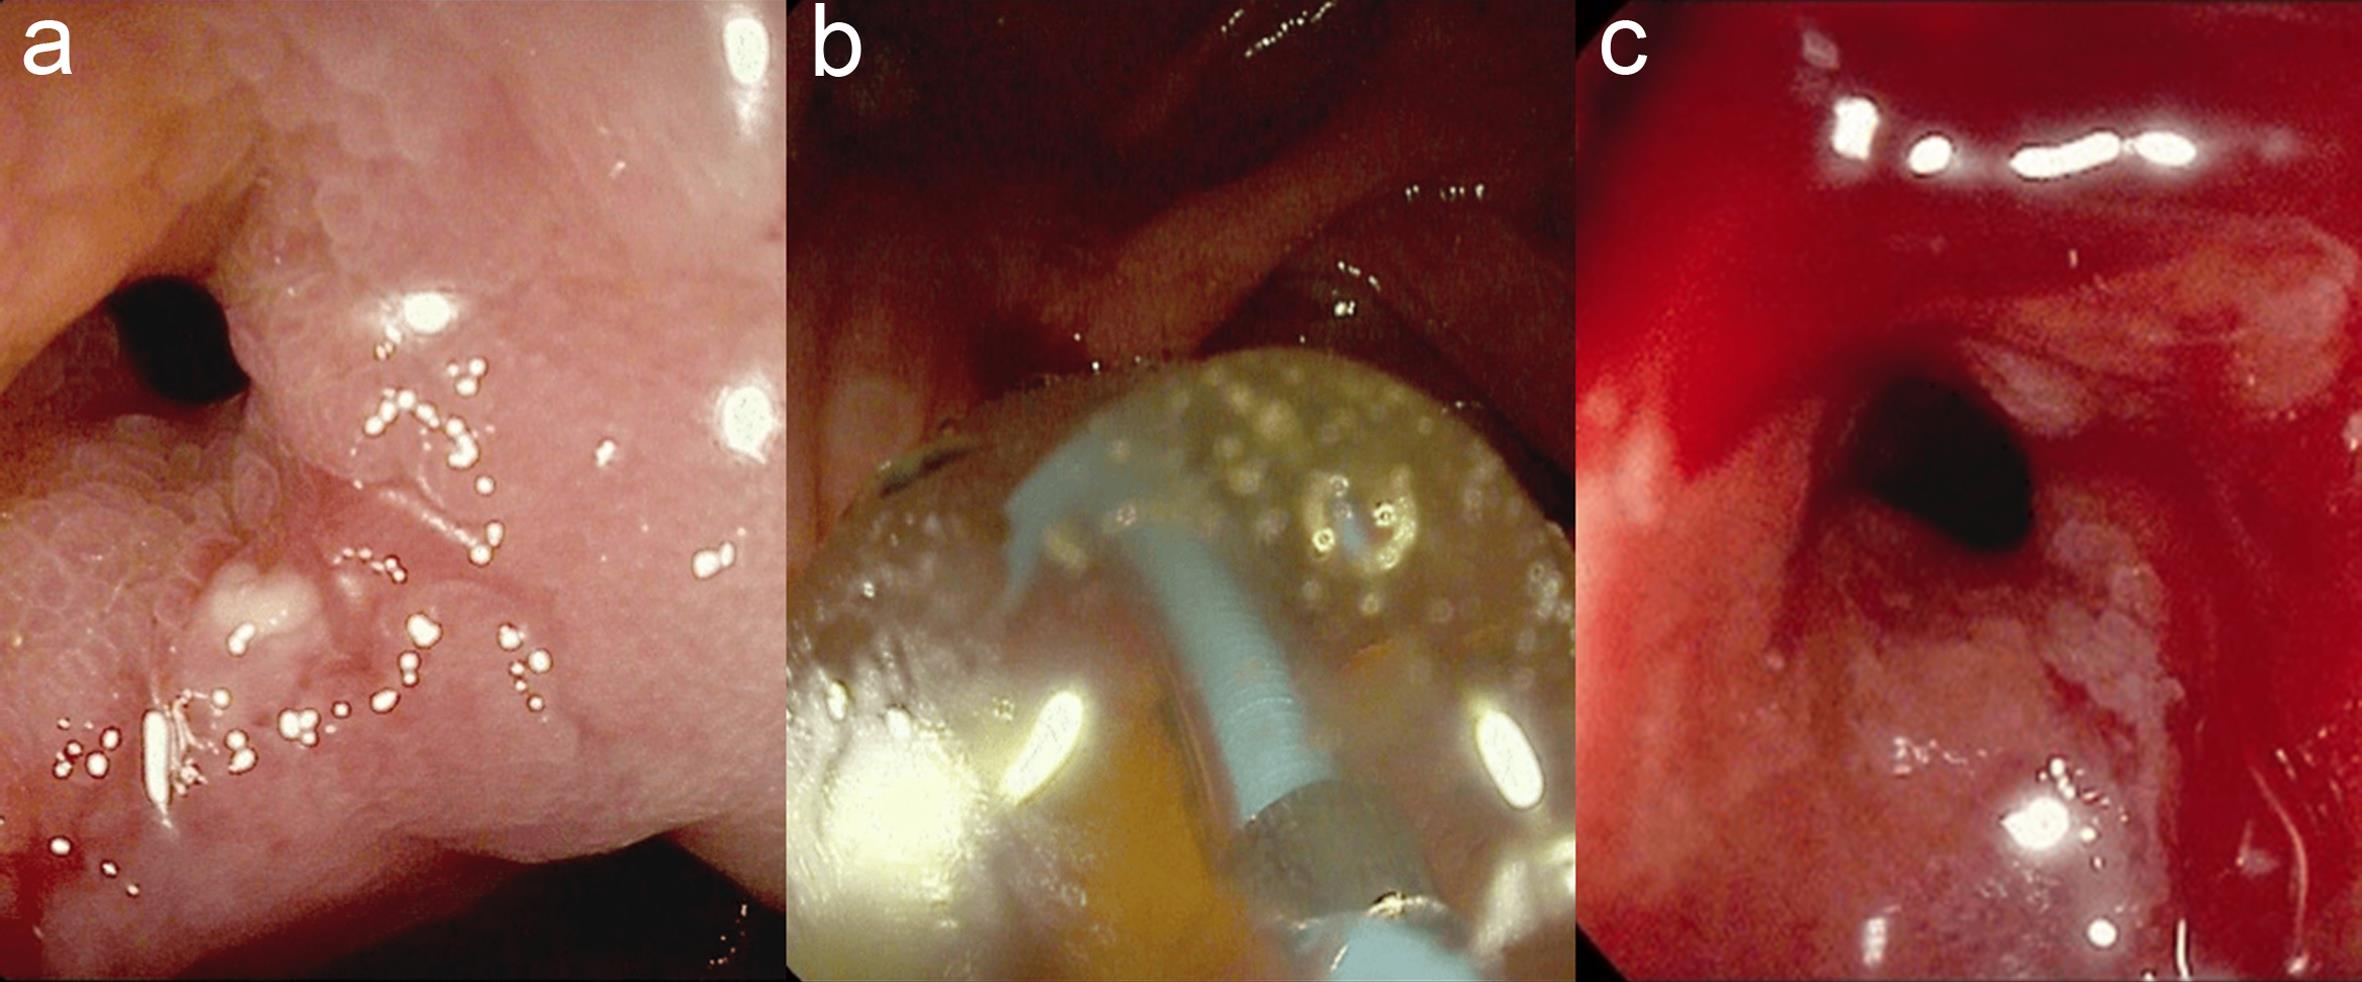 Non endoscopically transitable ileo-ciecal stenosis in CD treated with wire guided endoscopic balloon dilatation.